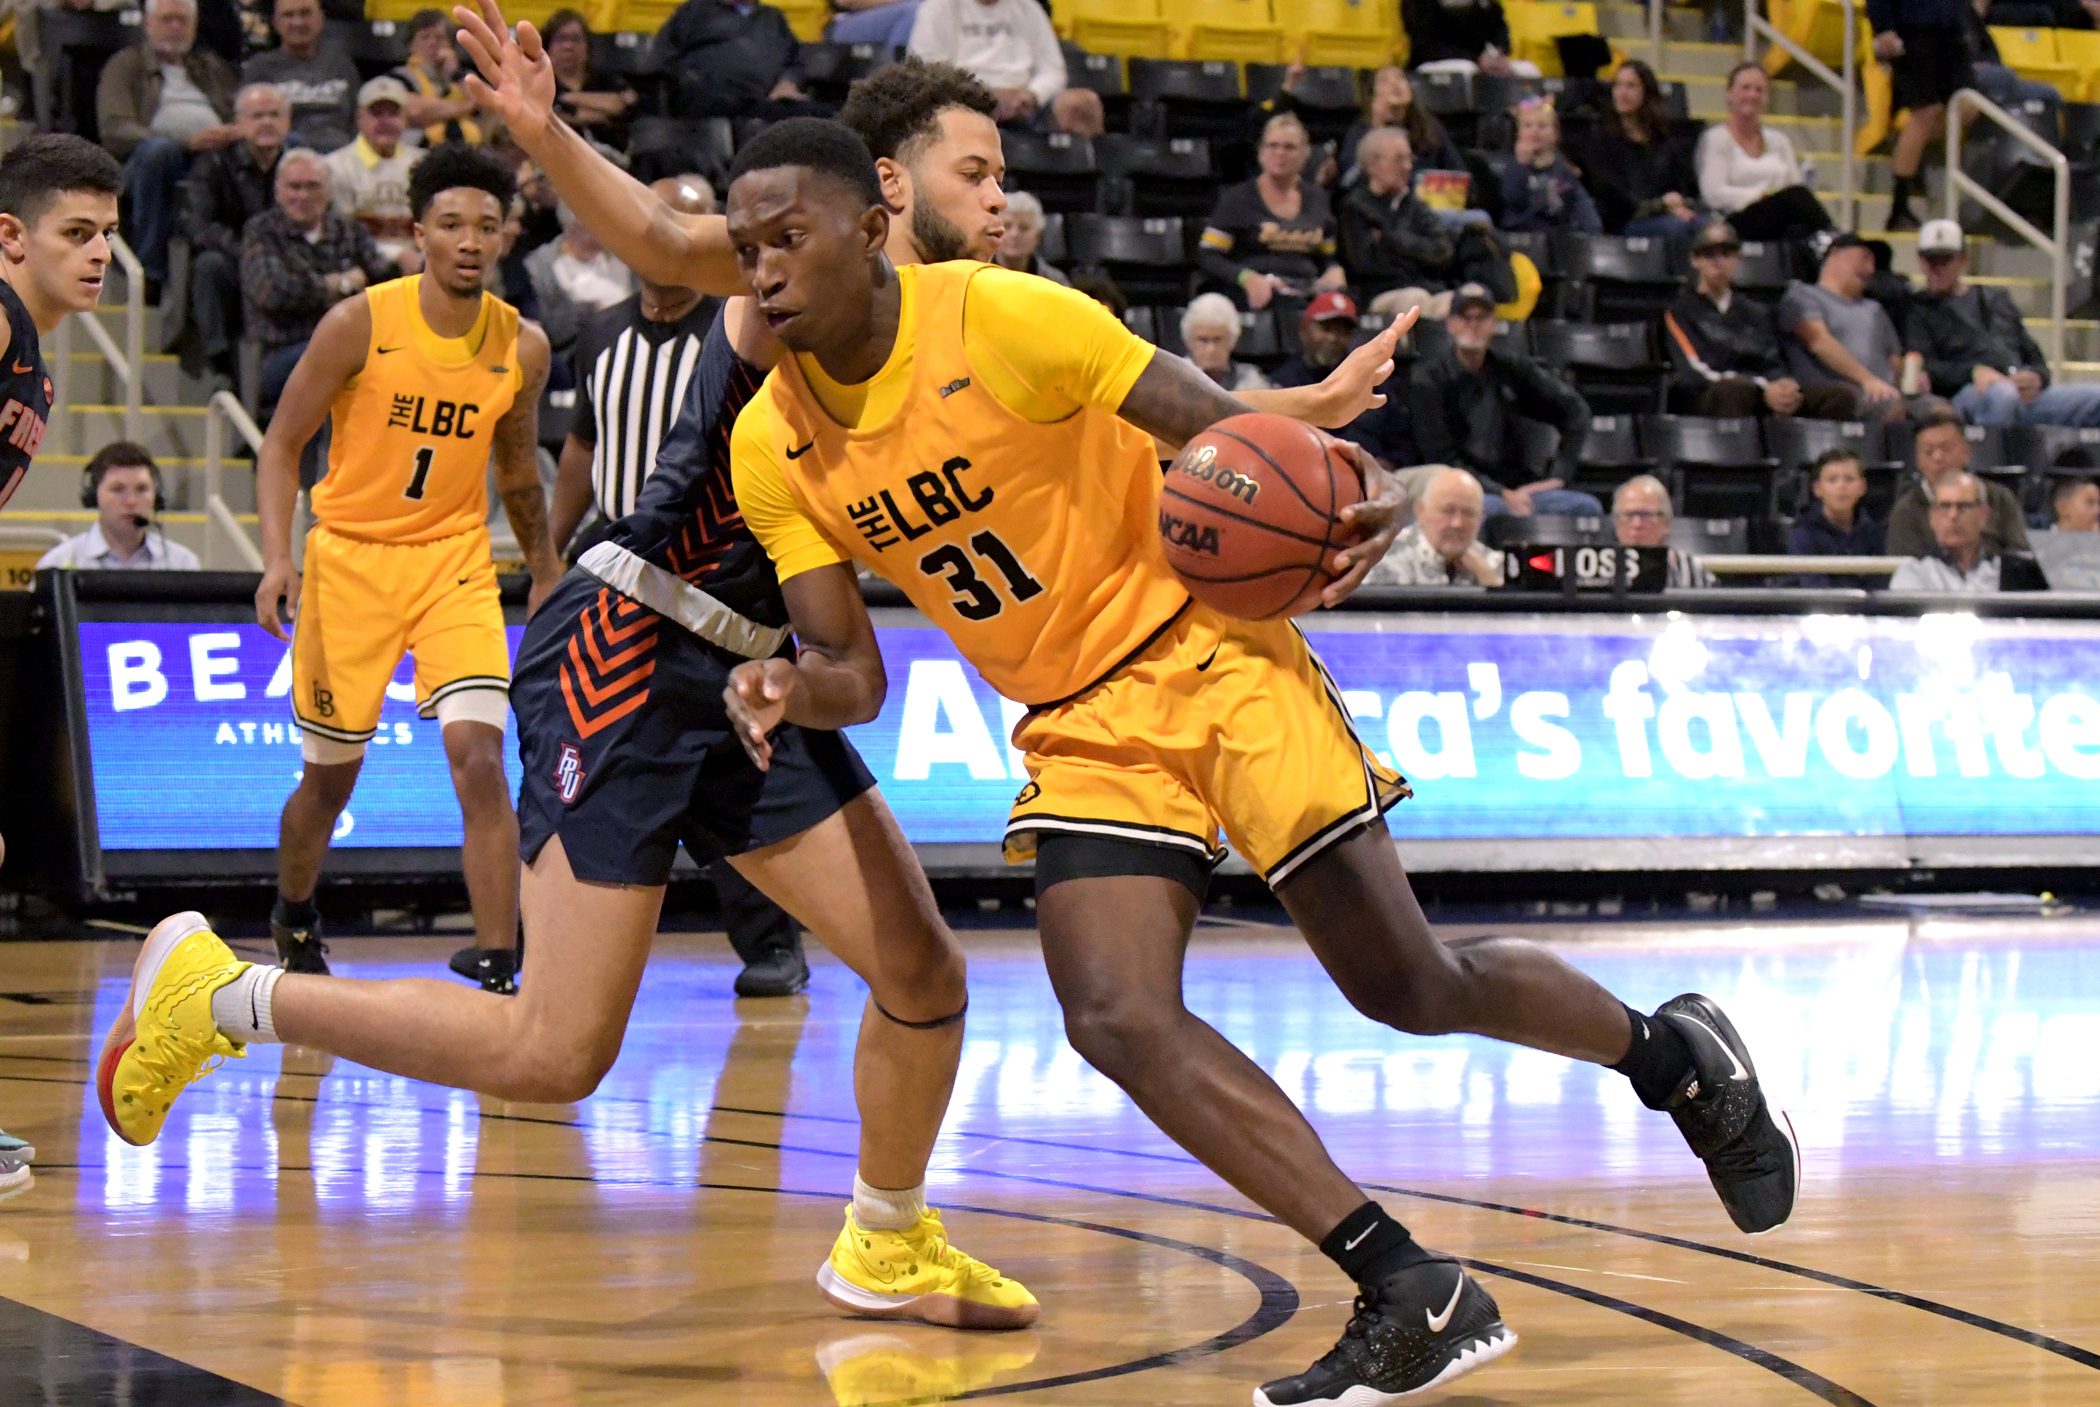 Long Beach State Men’s Basketball Wins Big At Home – The562.org